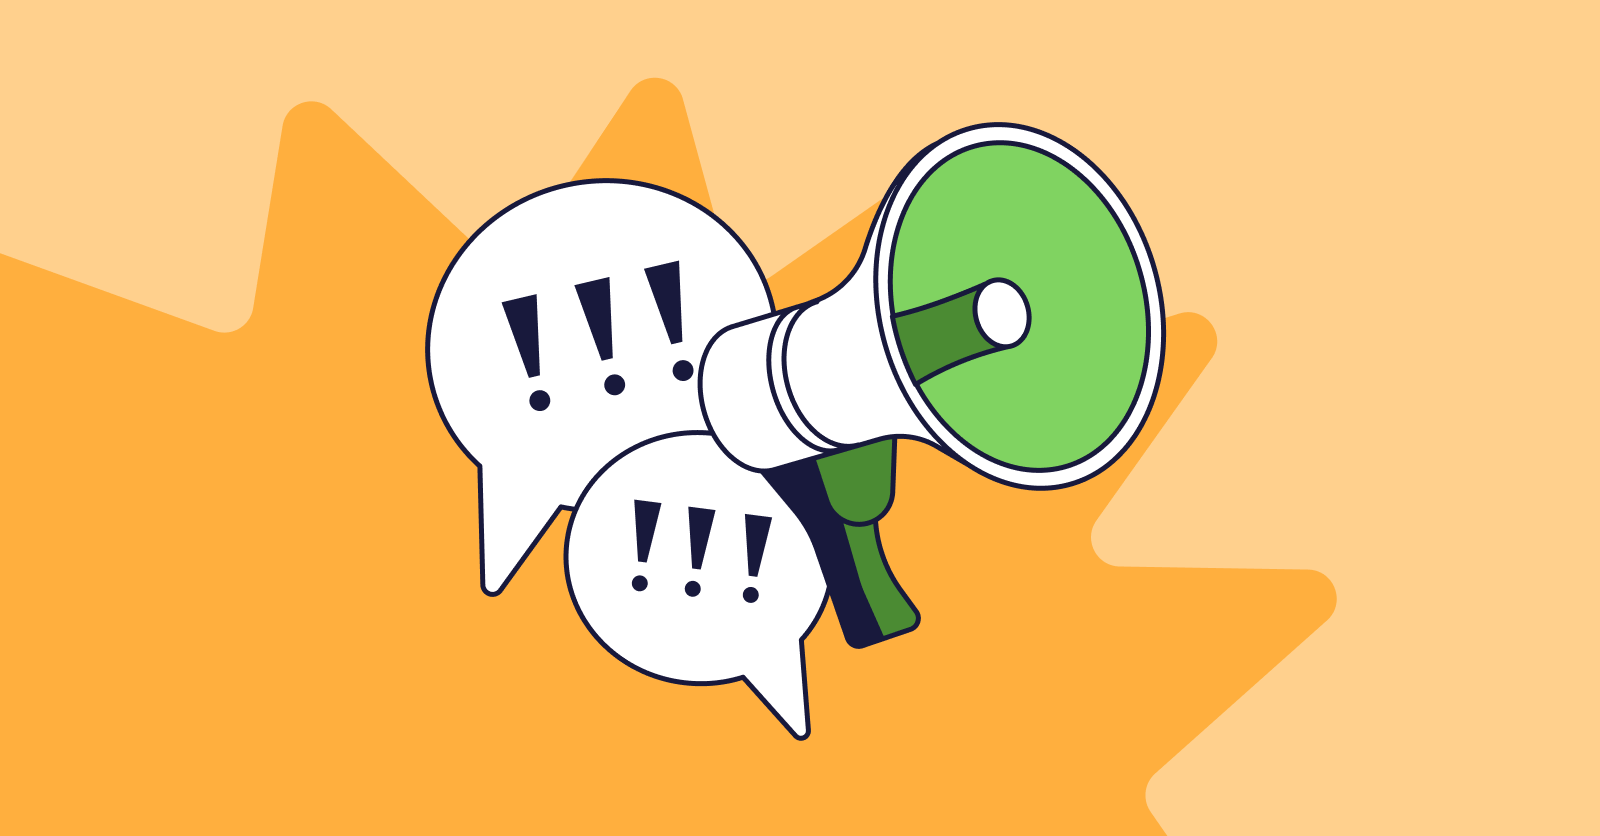 Illustration of a megaphone with speech bubbles around it.